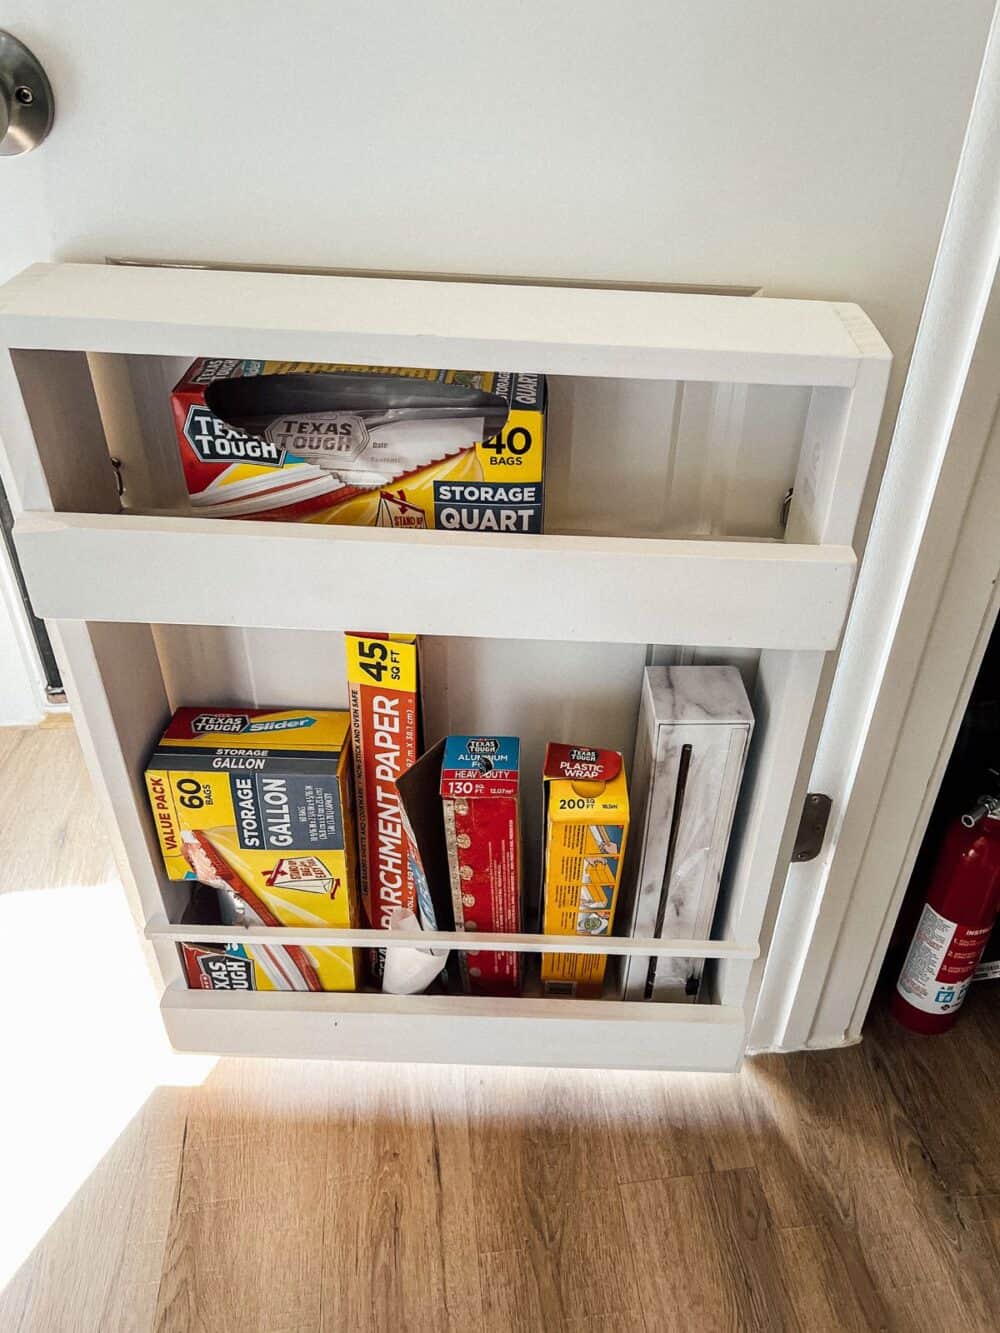 Pantry door with a wooden organizer for foil and plastic wrap